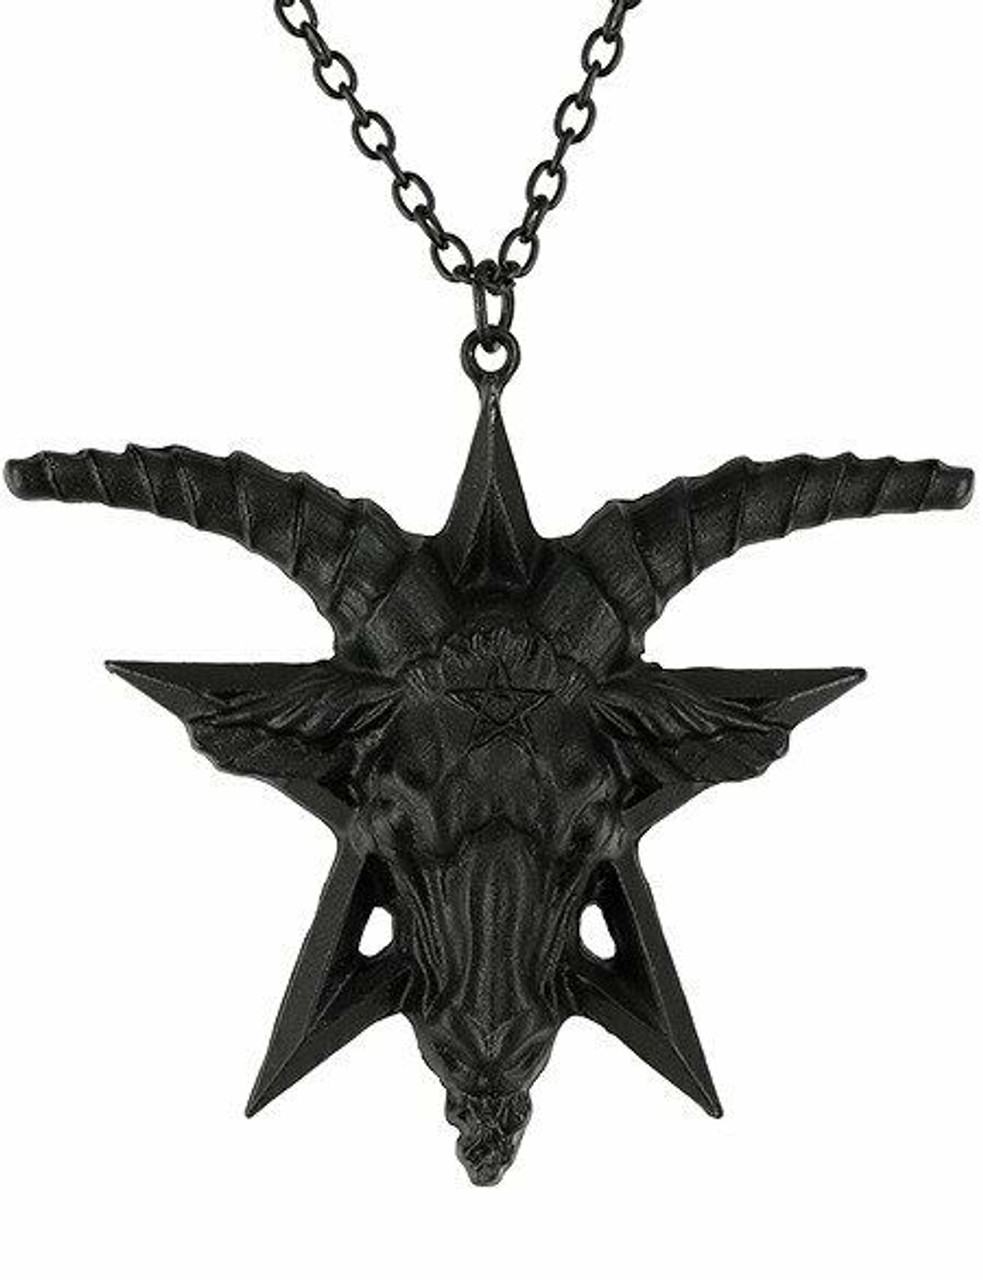 The Romance of The Black Rose Pendant by Alchemy Gothic